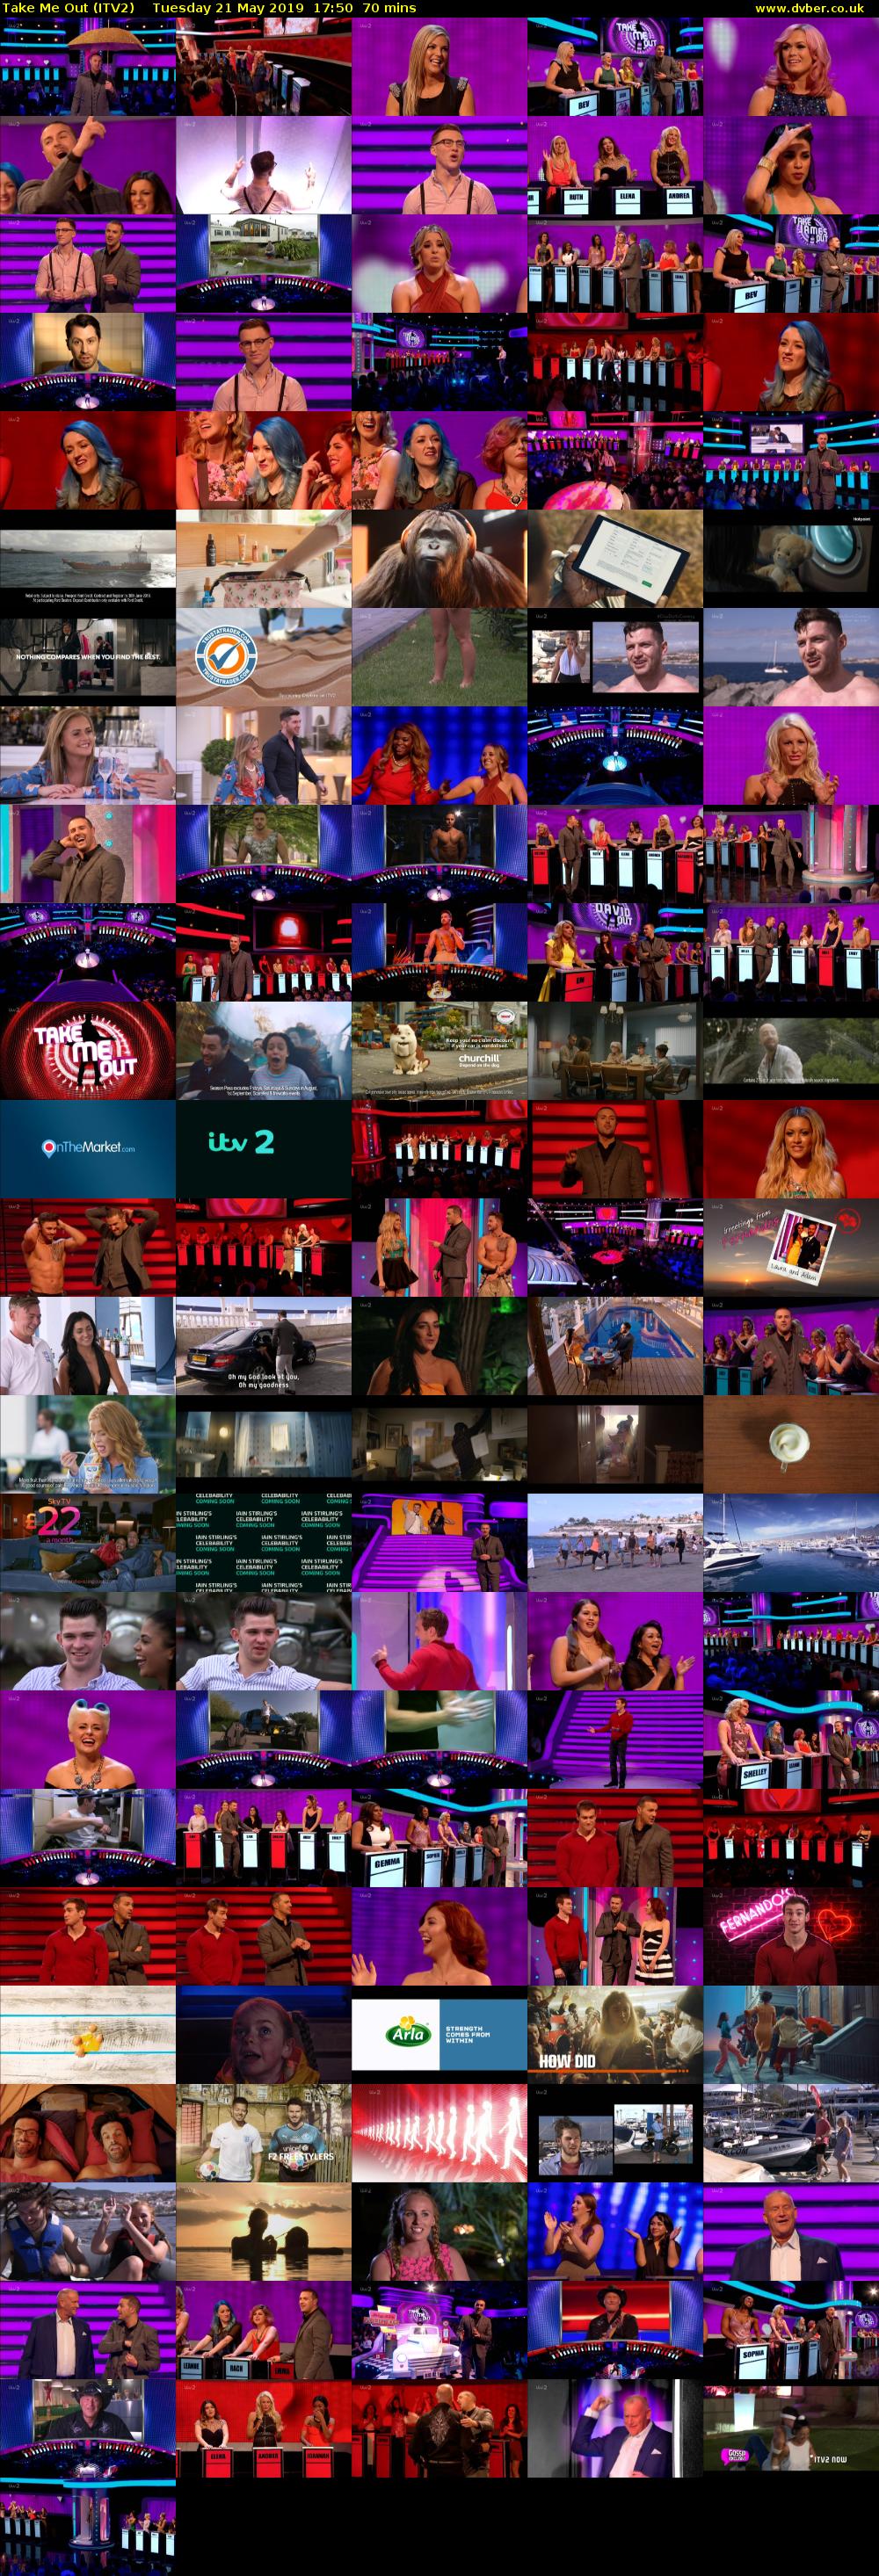 Take Me Out (ITV2) Tuesday 21 May 2019 17:50 - 19:00